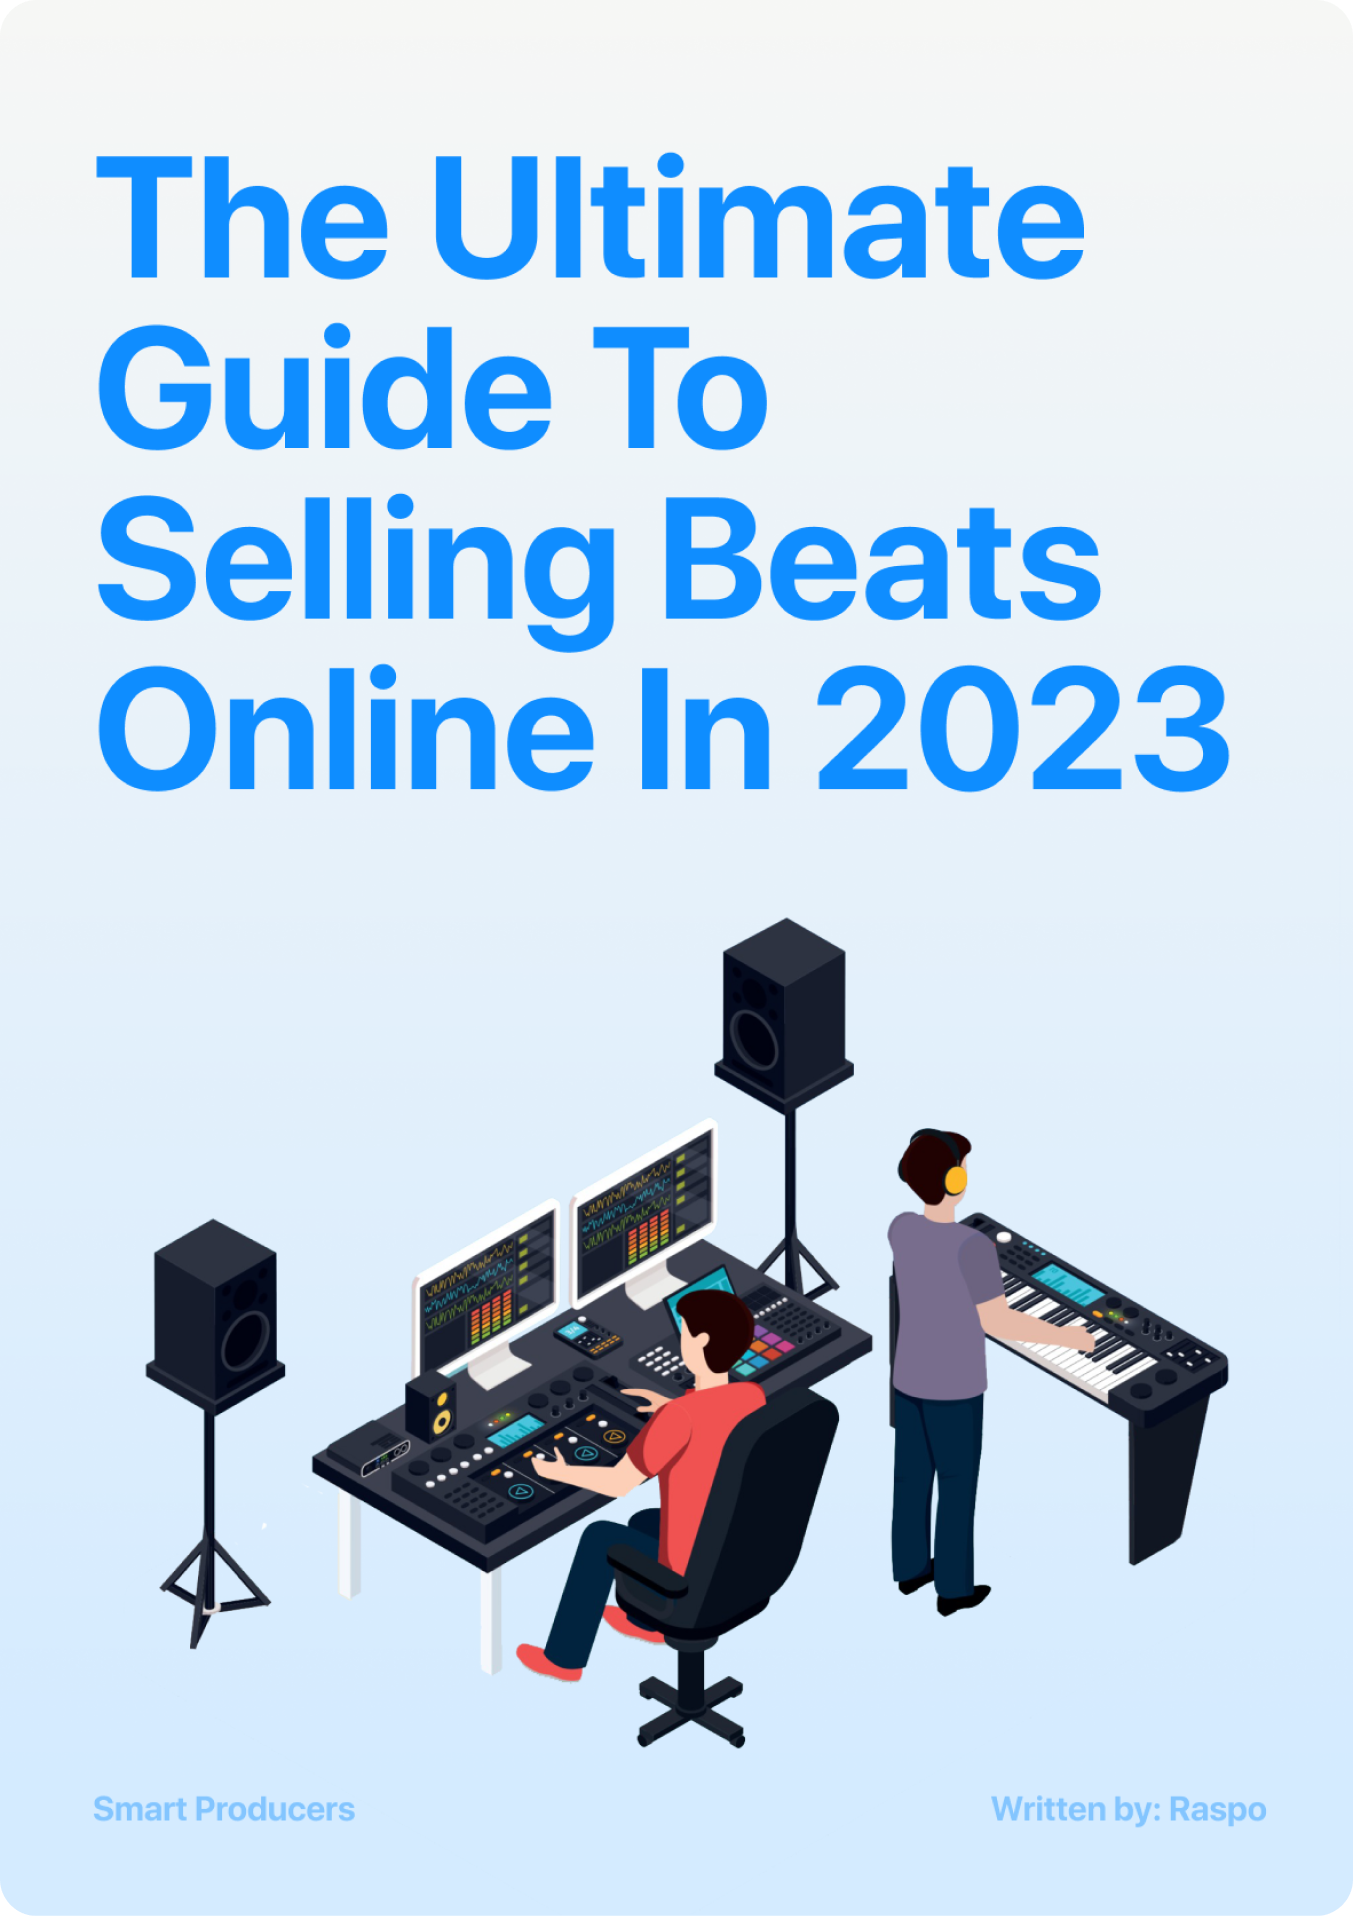 The ultimae guide to selling beats online in 2023